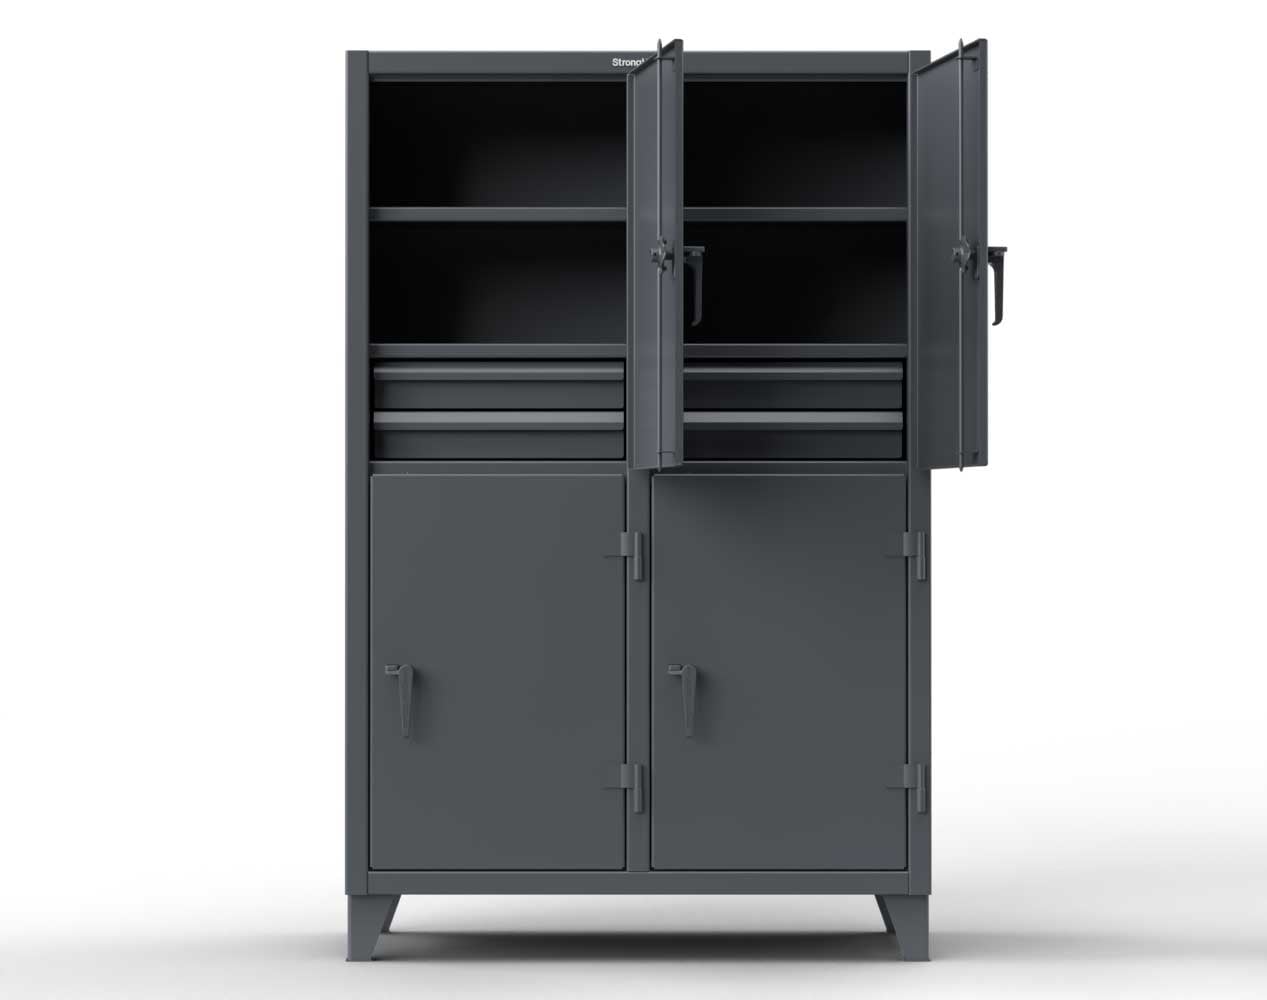 Extreme Duty 12 GA Double-Tier Locker with 4 Compartments, 6 Shelves, 8 Drawers - 50 in. W x 24in. D x 78 in. H